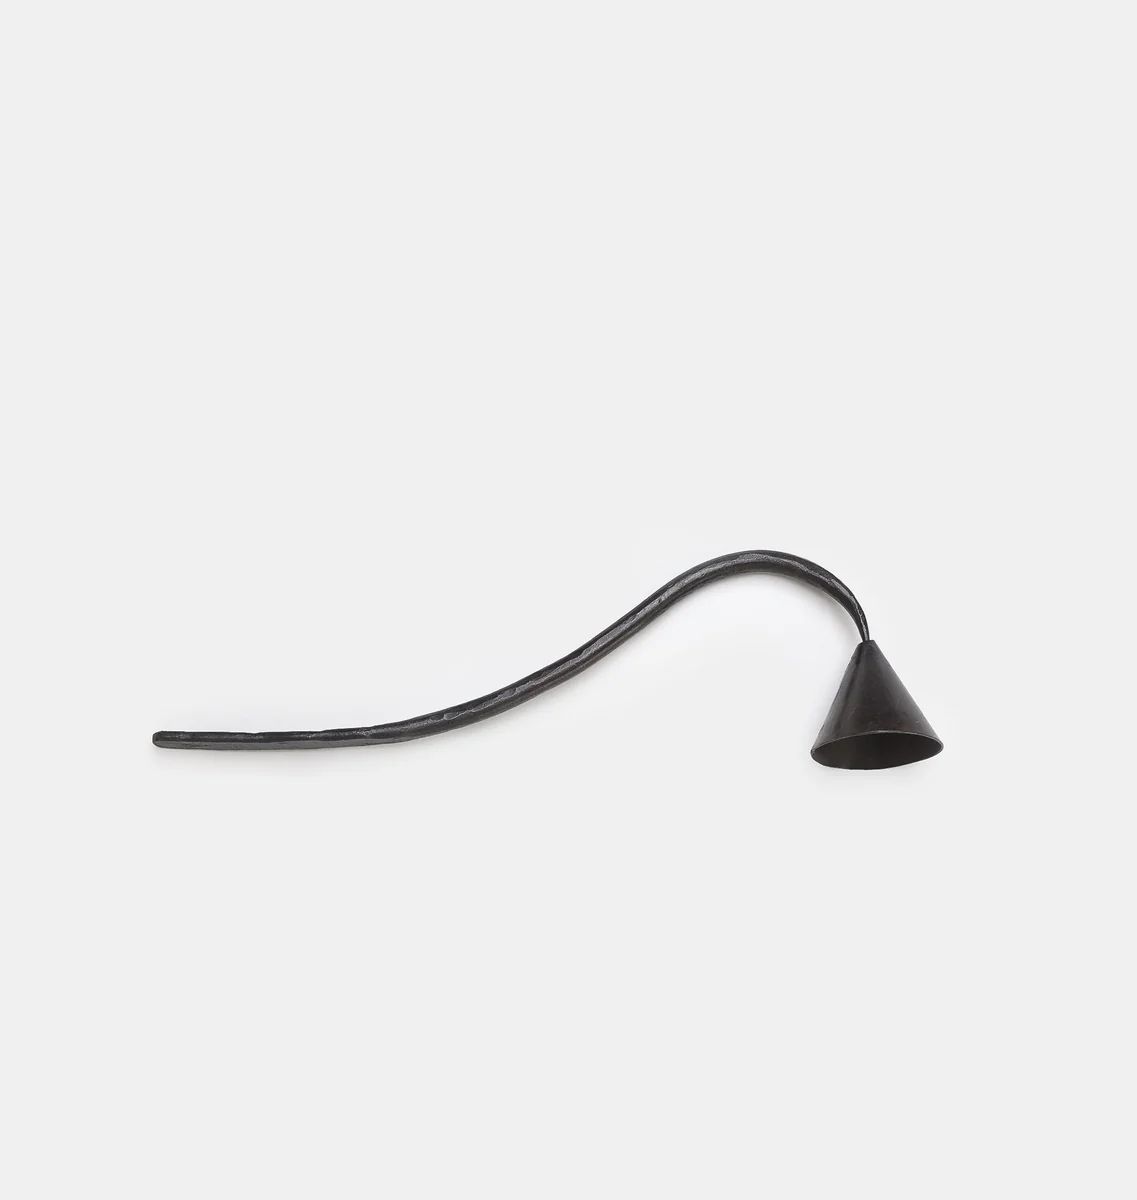 Candle Snuffer | Amber Interiors